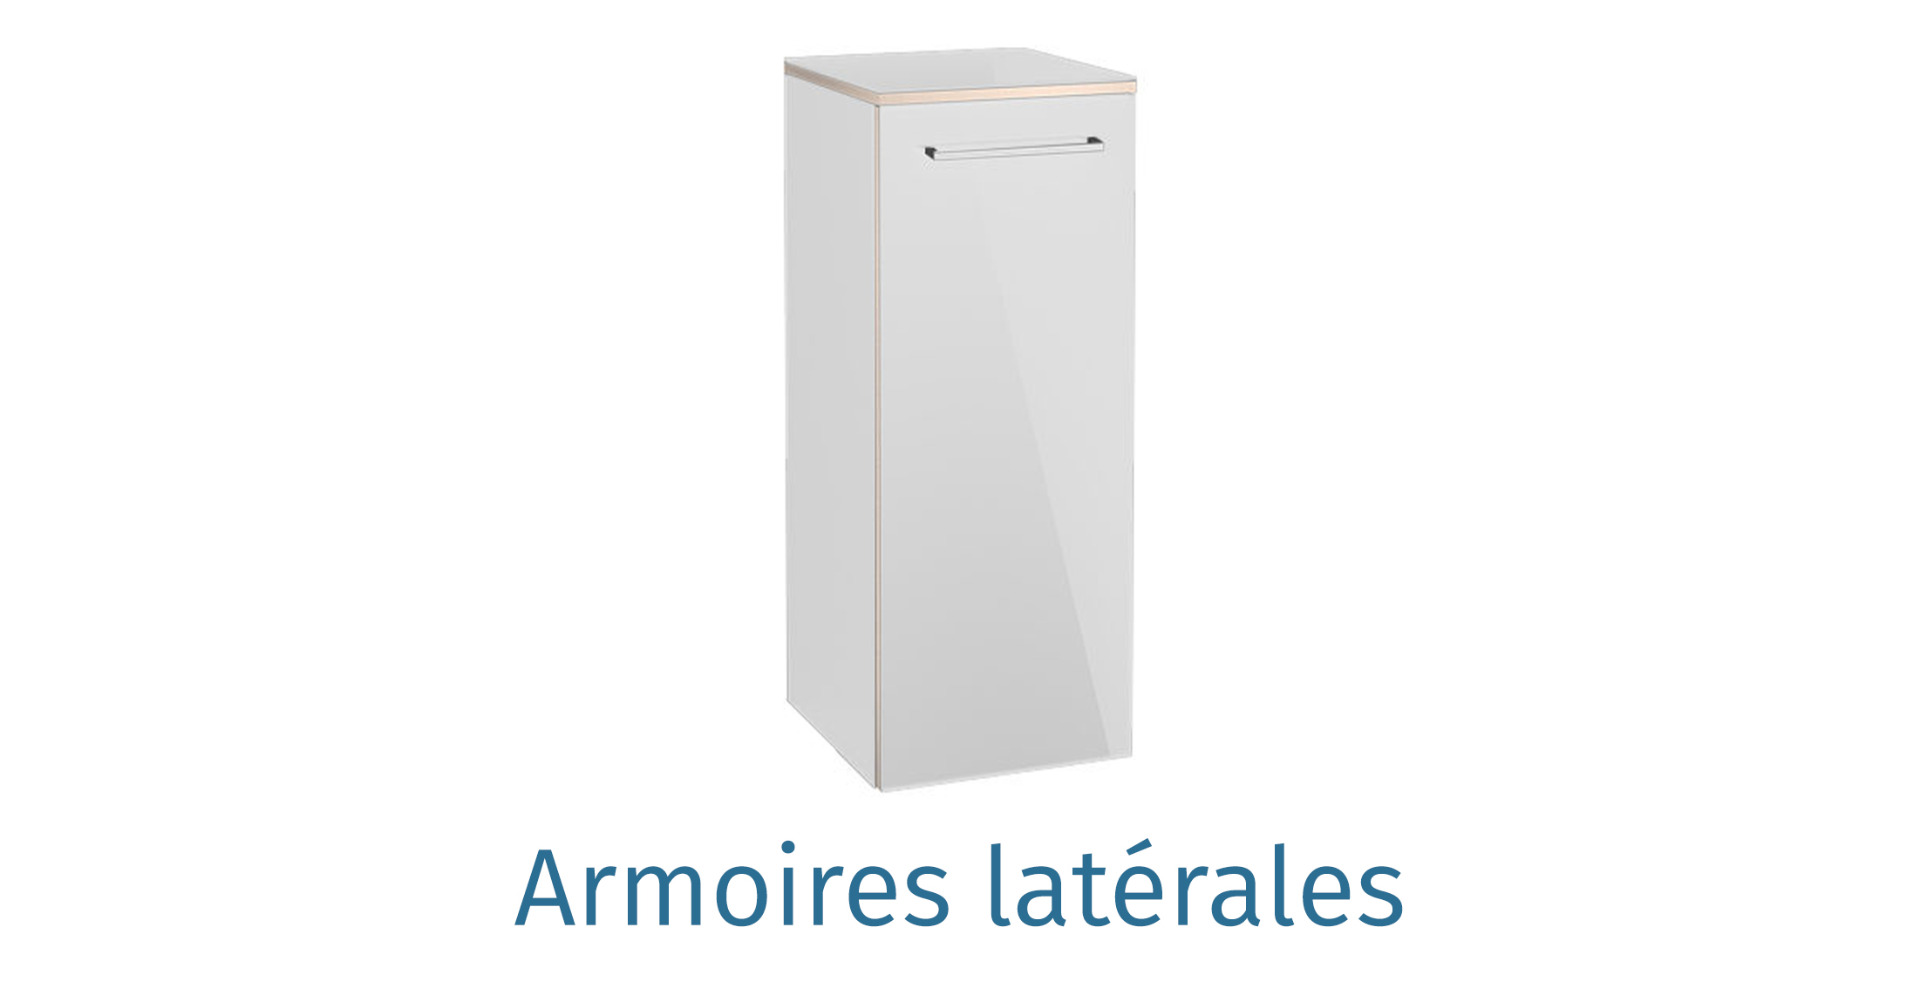 Armoires laterales